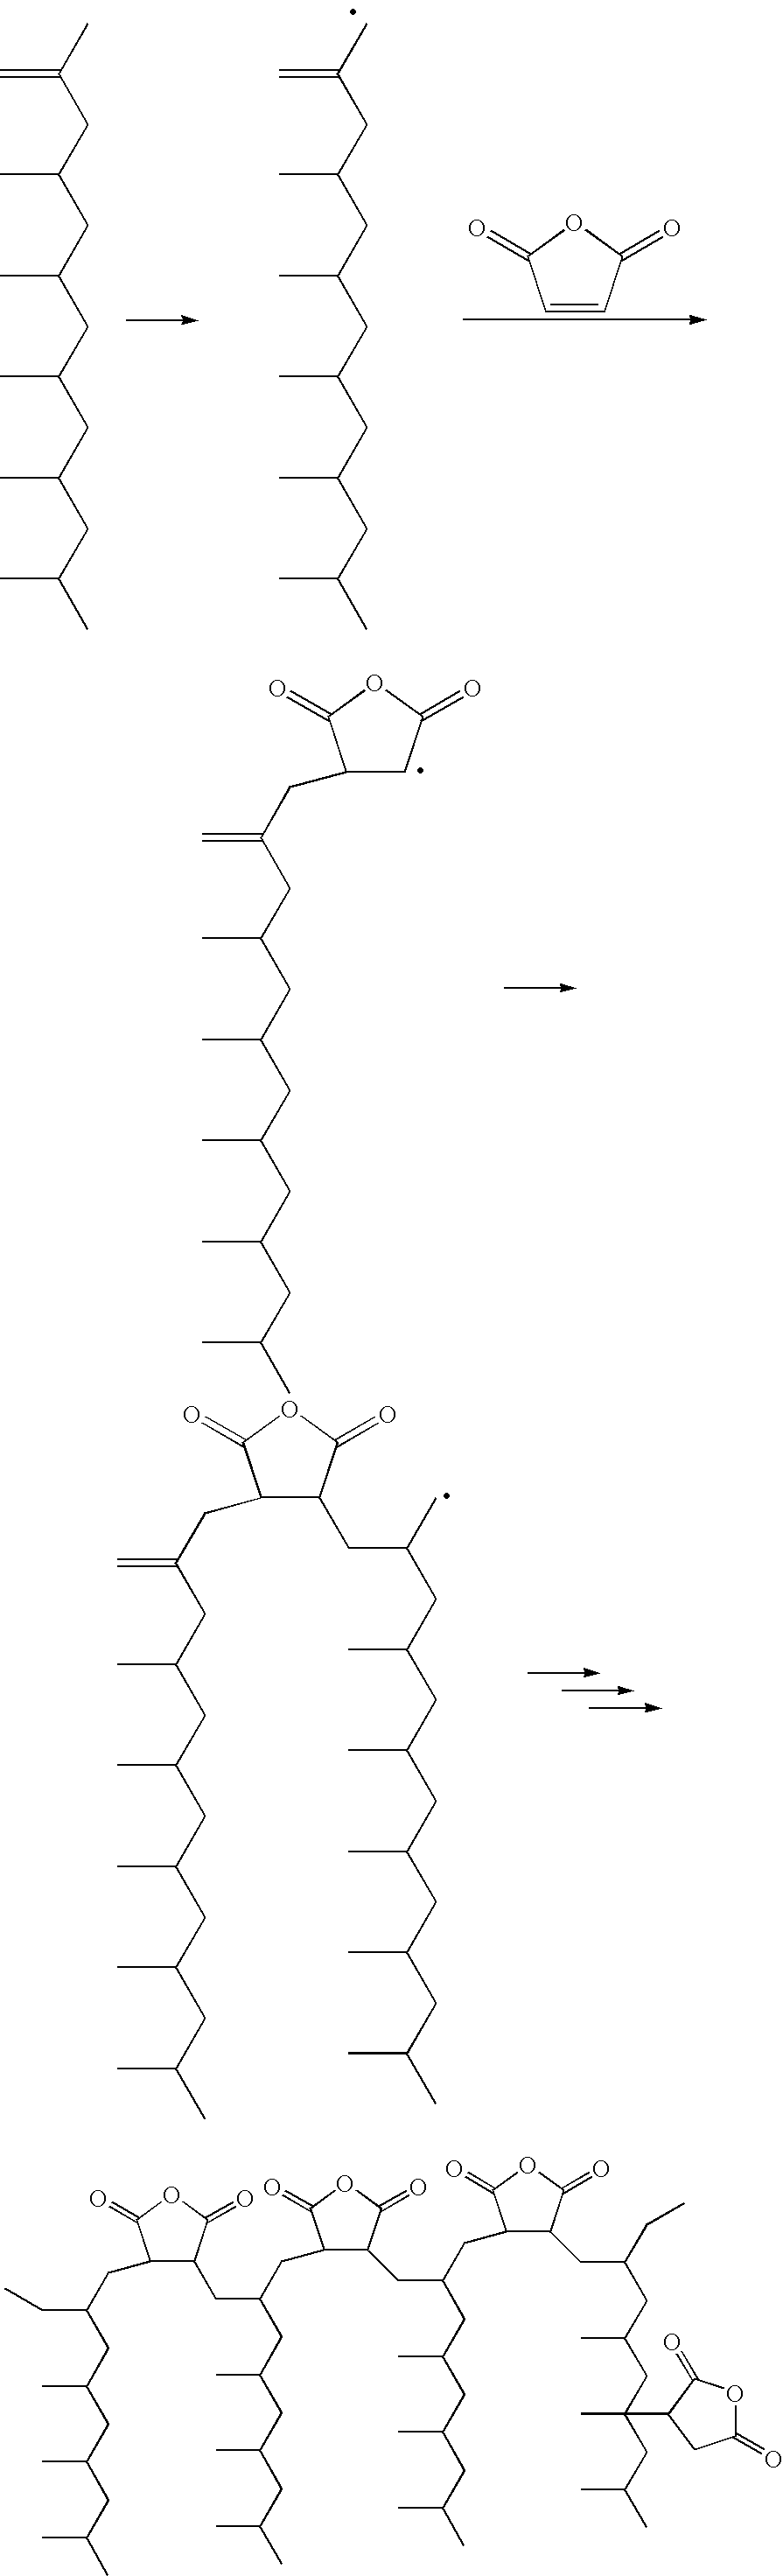 Polypropylene having a high maleic anhydride content